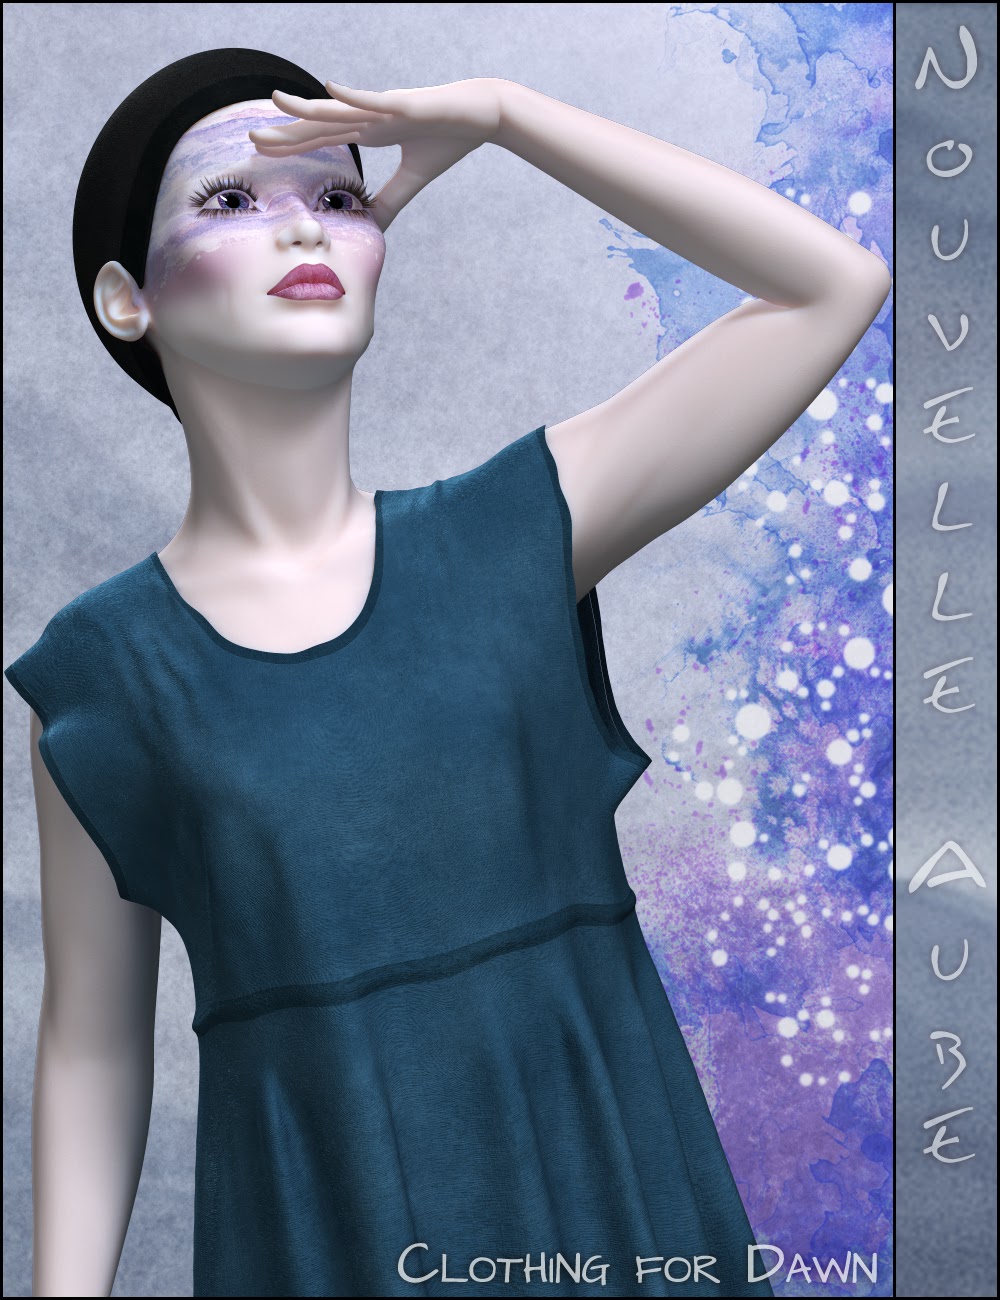 Nouvelle Aube Clothing for Dawn Product Image 01.jpg